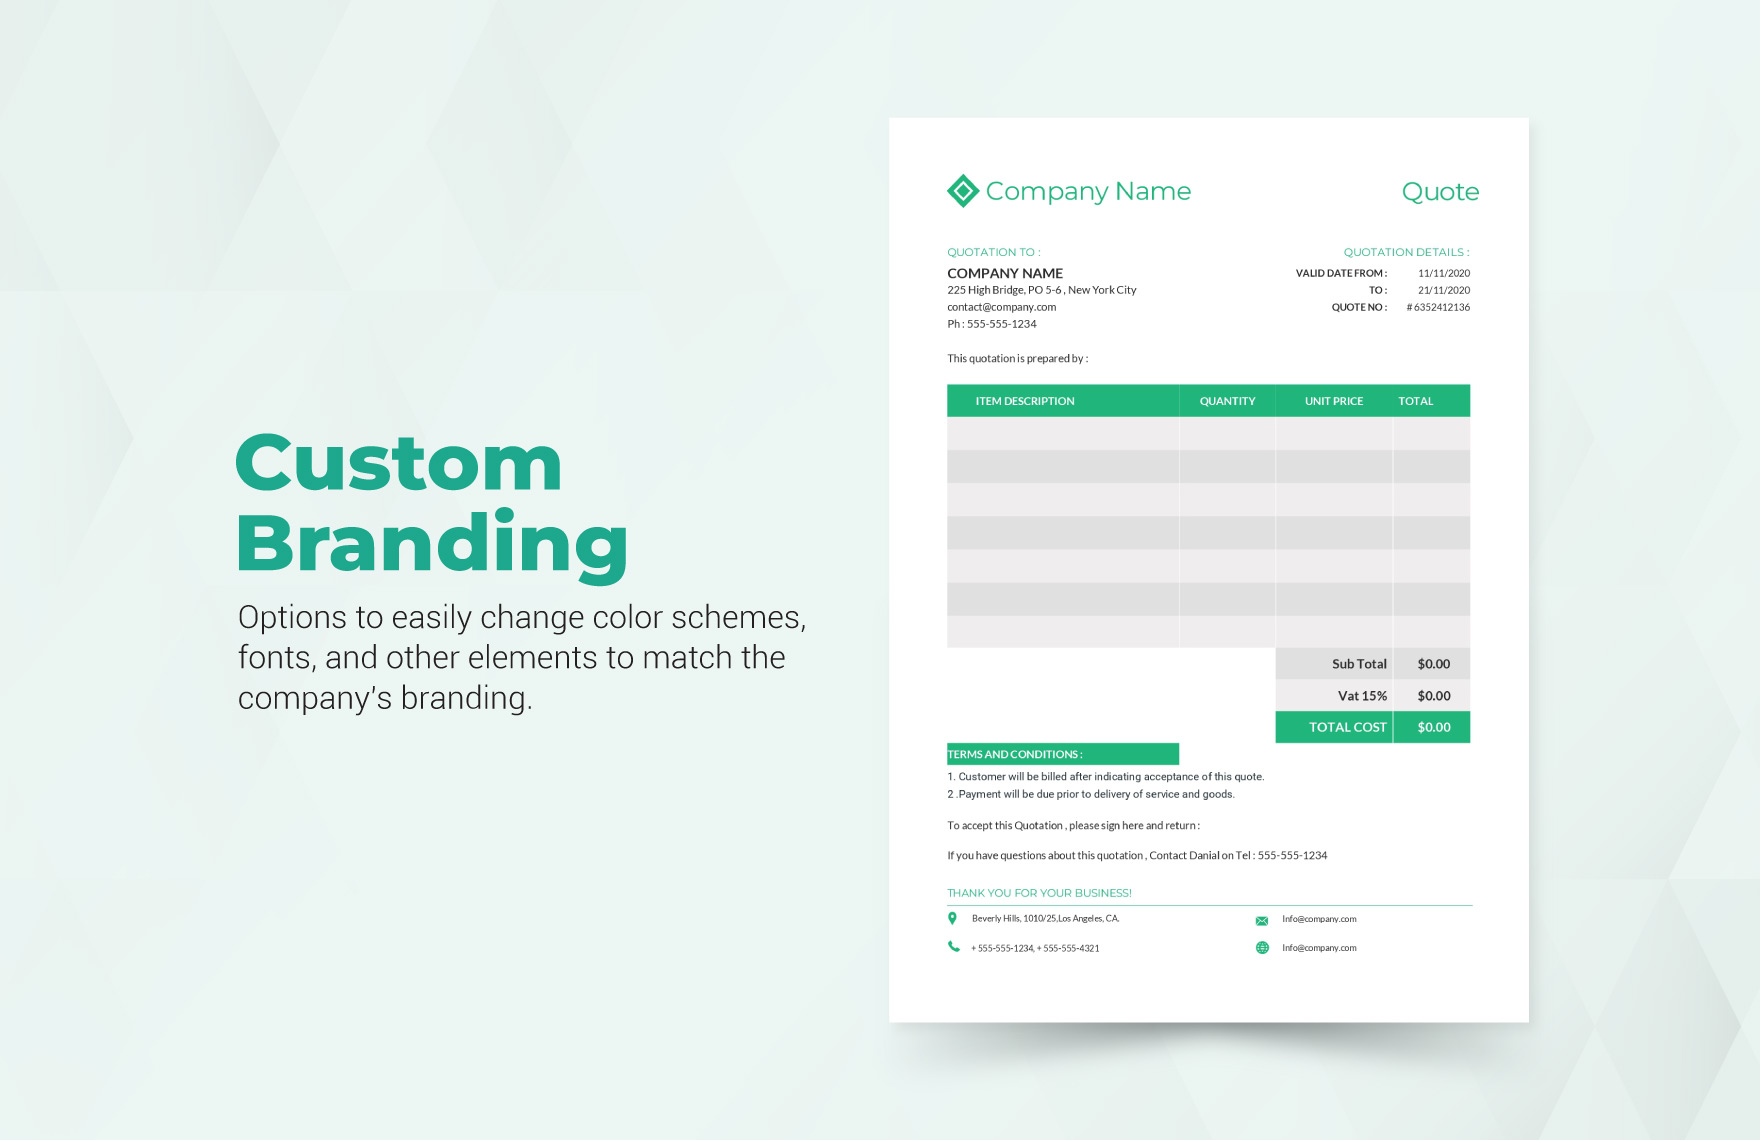 Sample Company Quotation Format Template